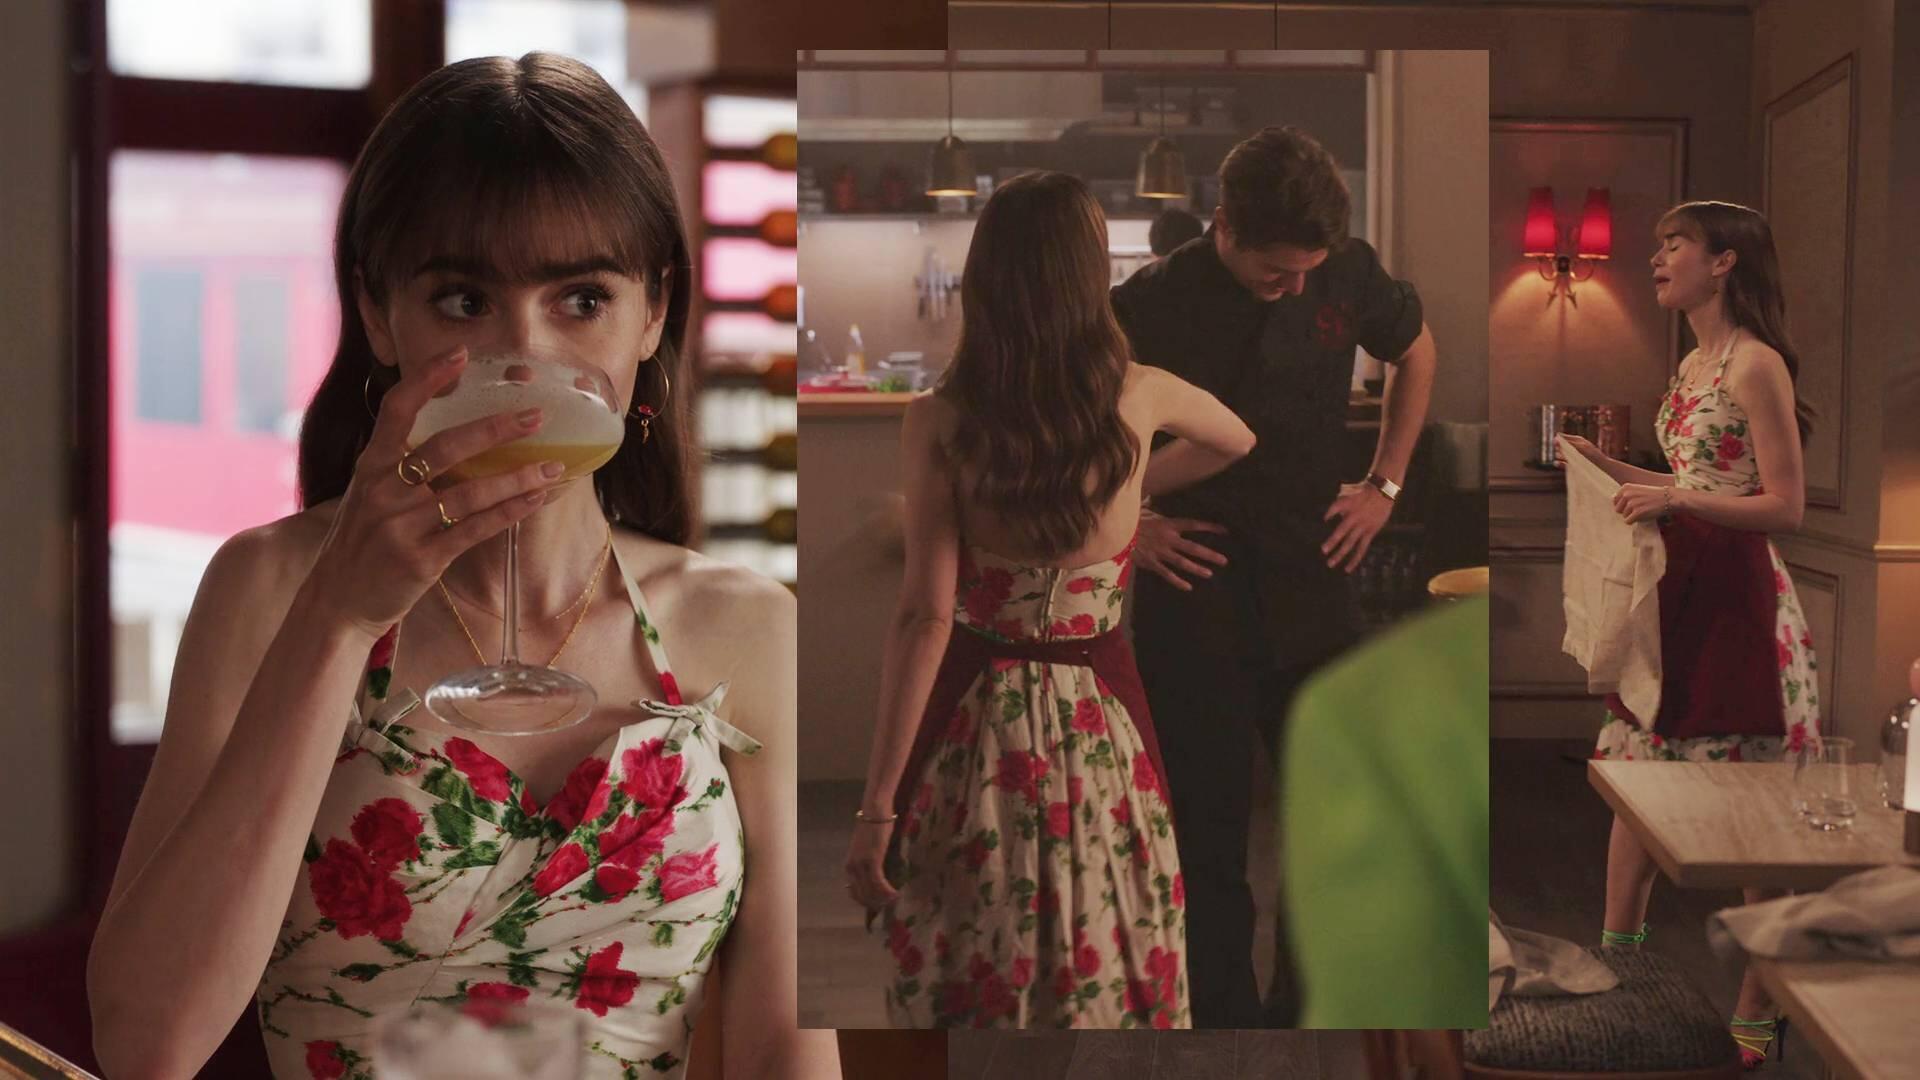 Lily Collins - Emily in Paris | Season 3 Episode 4 | Lily Collins style